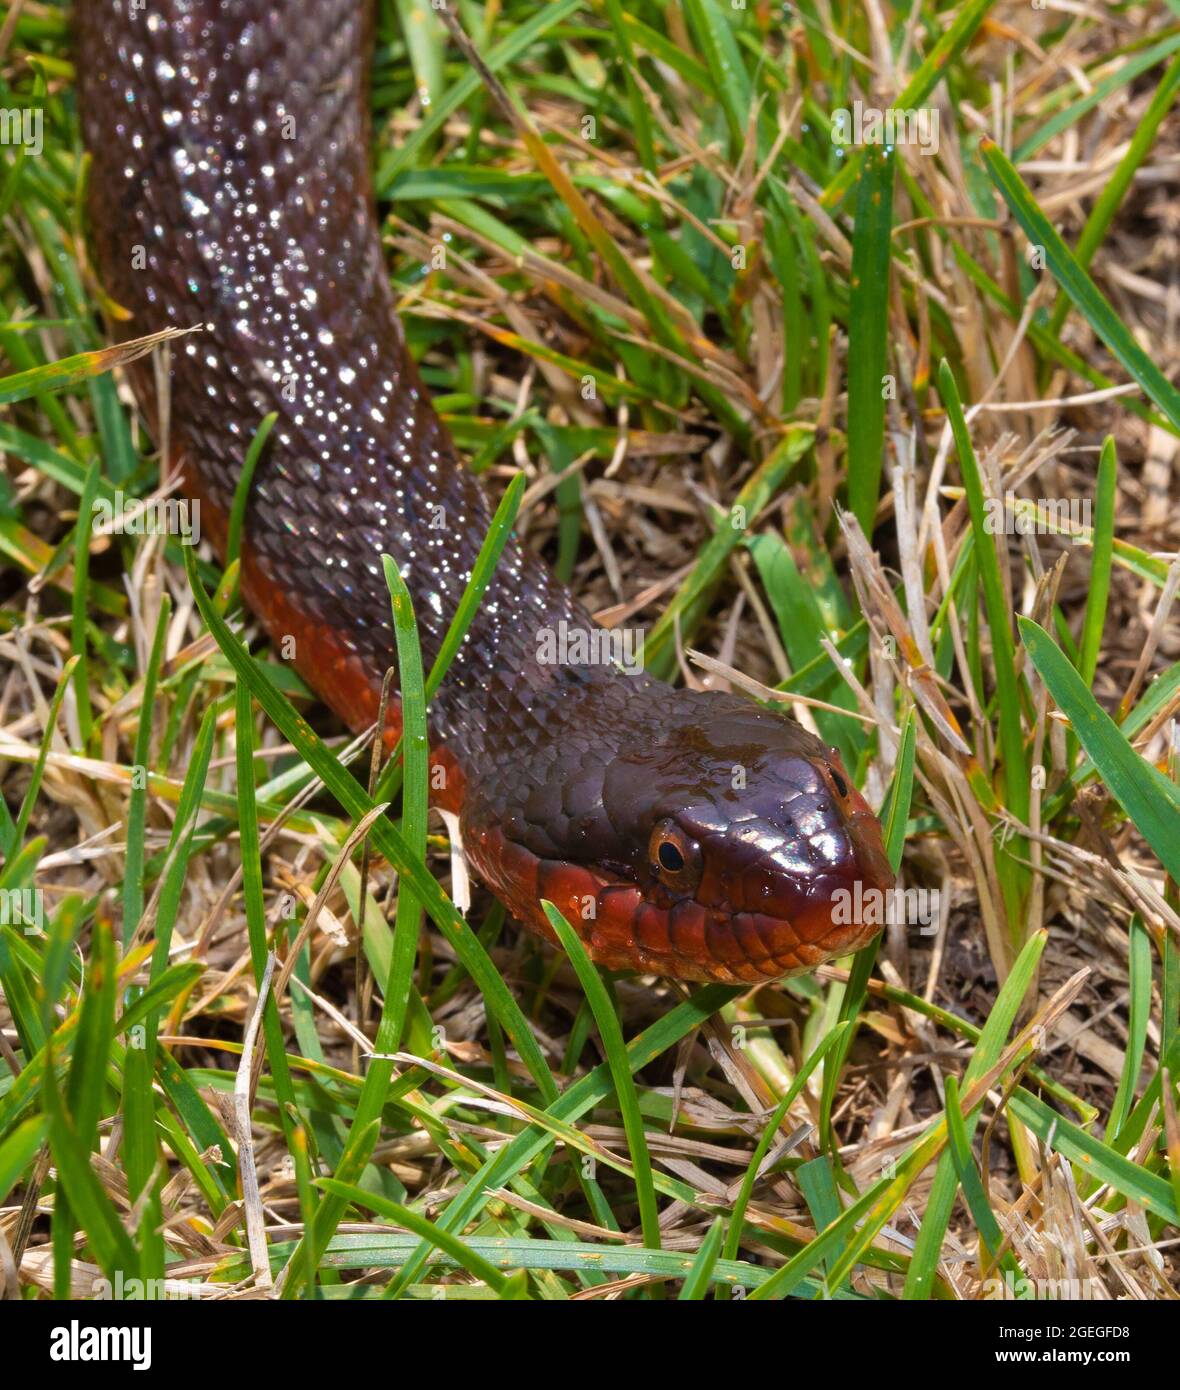 Red-bellied watersnake in some grass in North Carolina Stock Photo